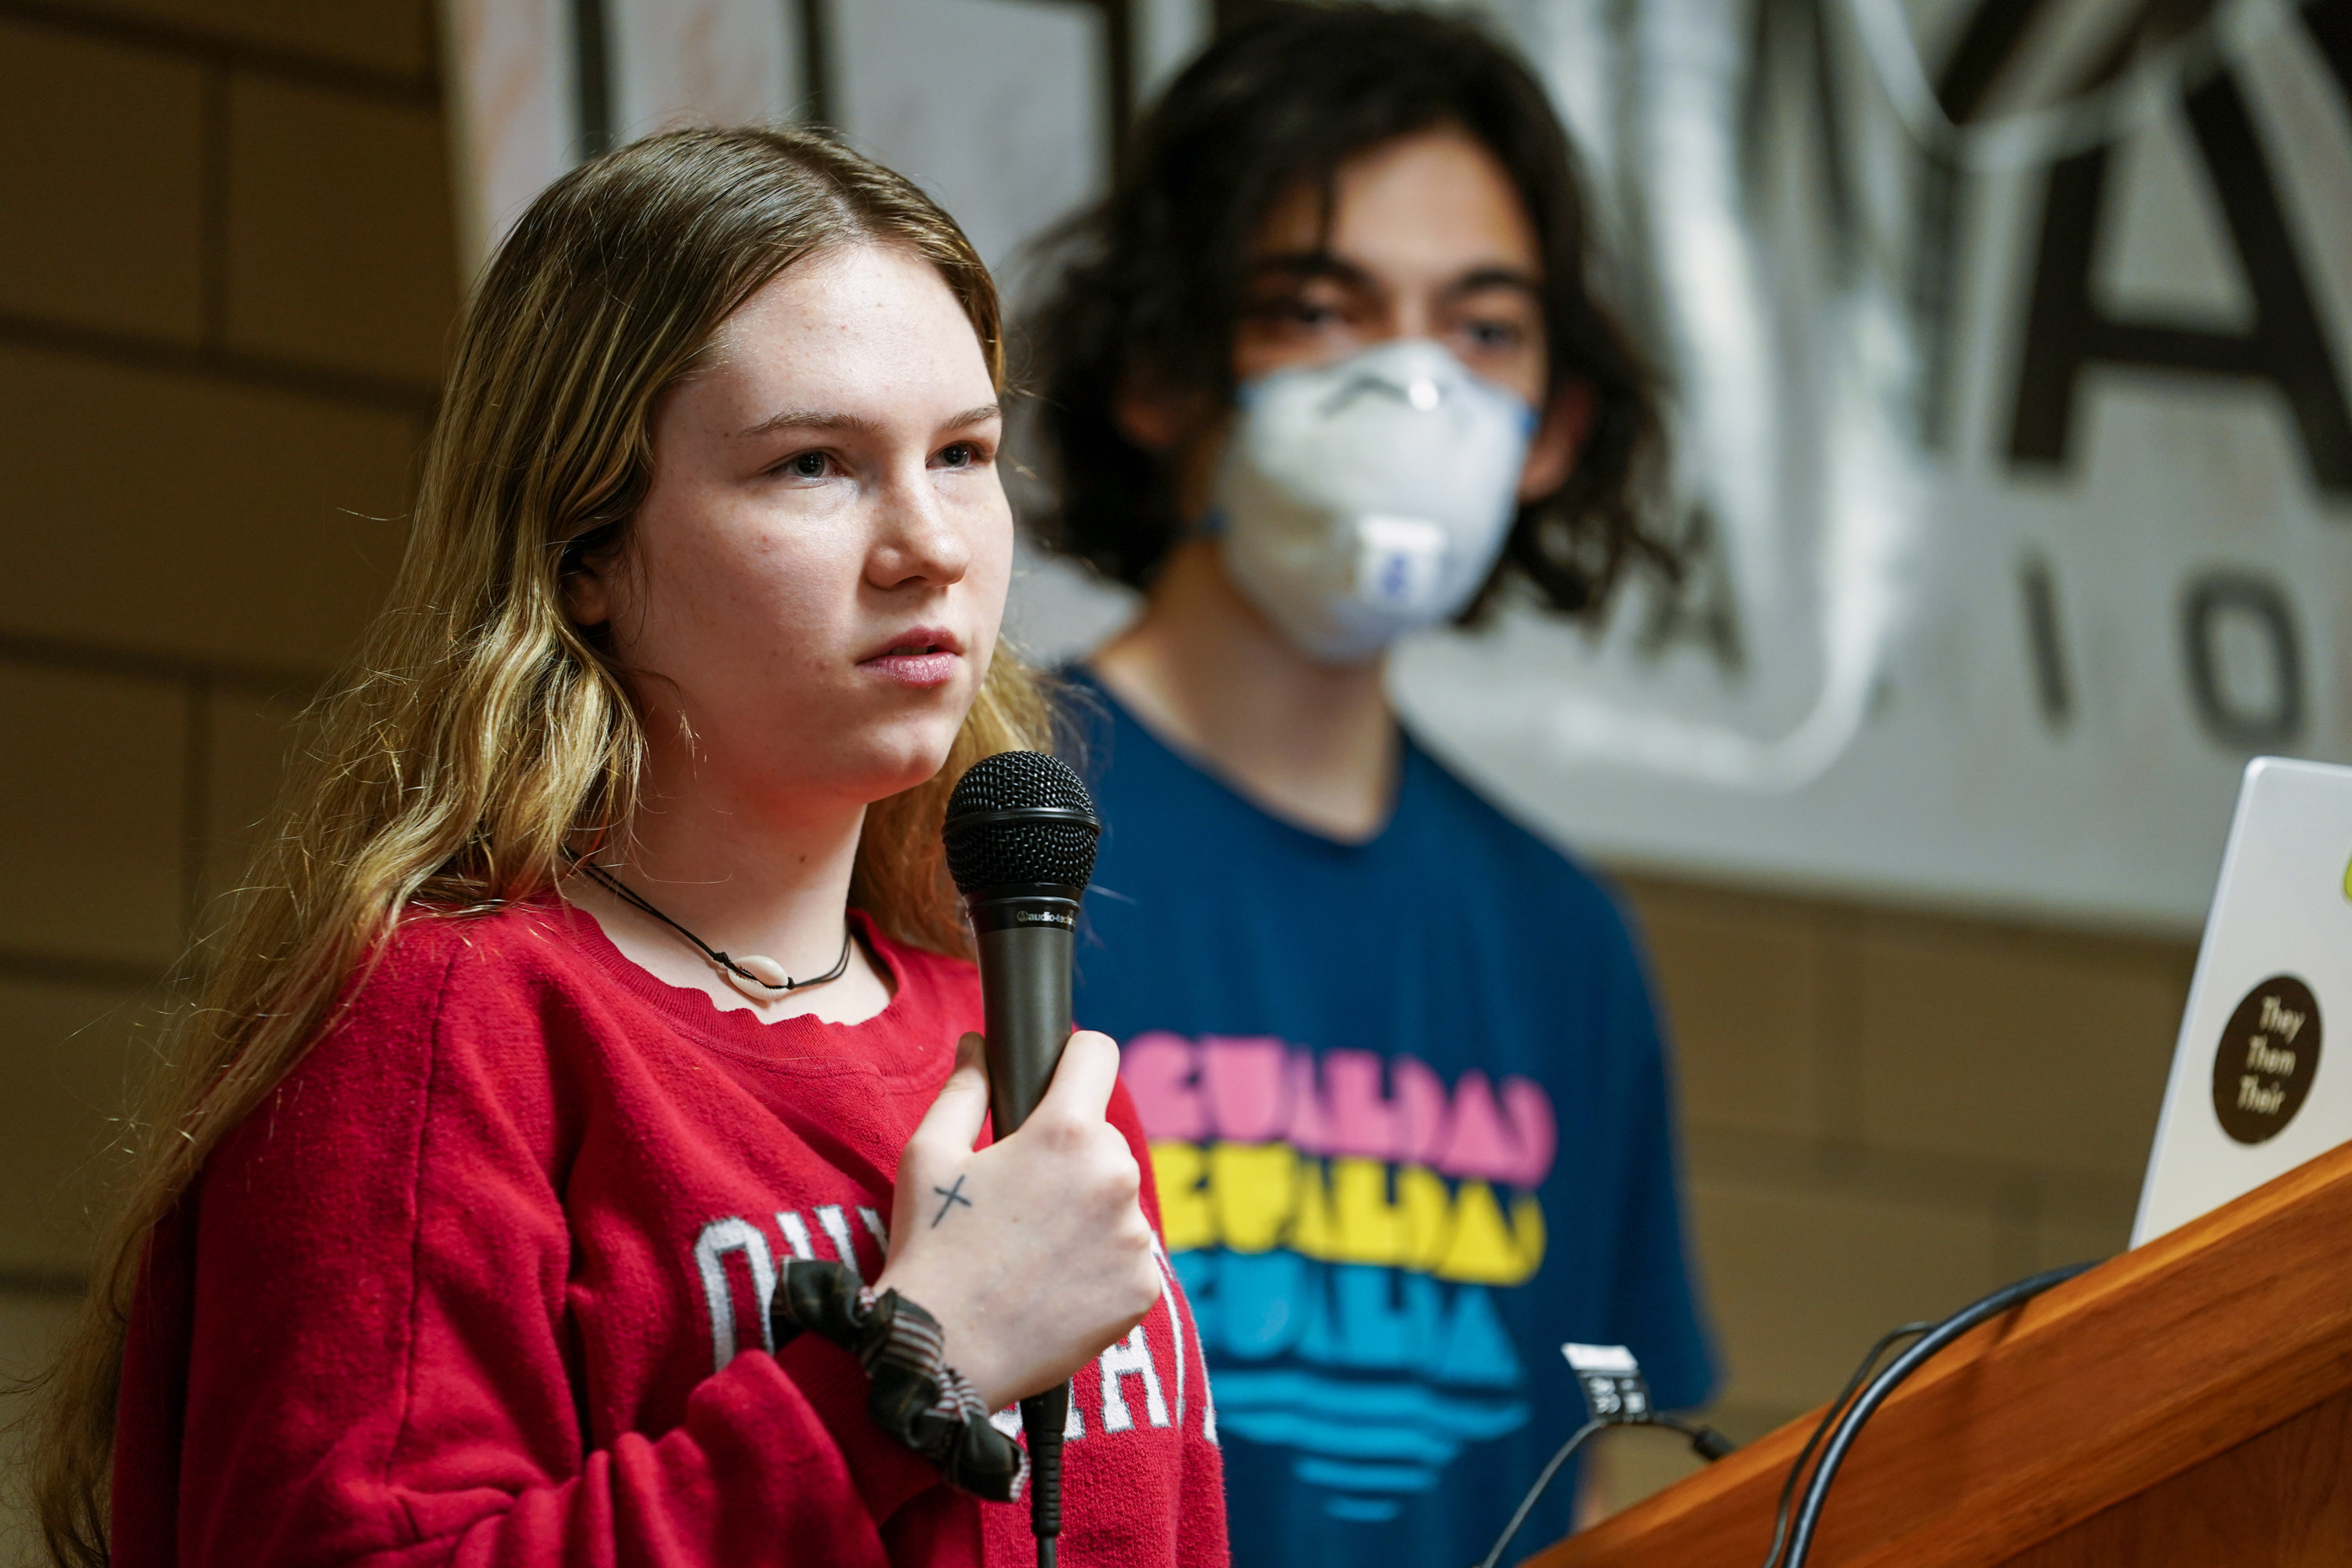 Jenna Cozza, 17, speaks during a youth town hall meeting inside a church in East Palestine, Ohio, on on April 1. Gen Z comprises slightly over 20 per cent of the US population. Photo: Pittsburgh Post-Gazette / TNS